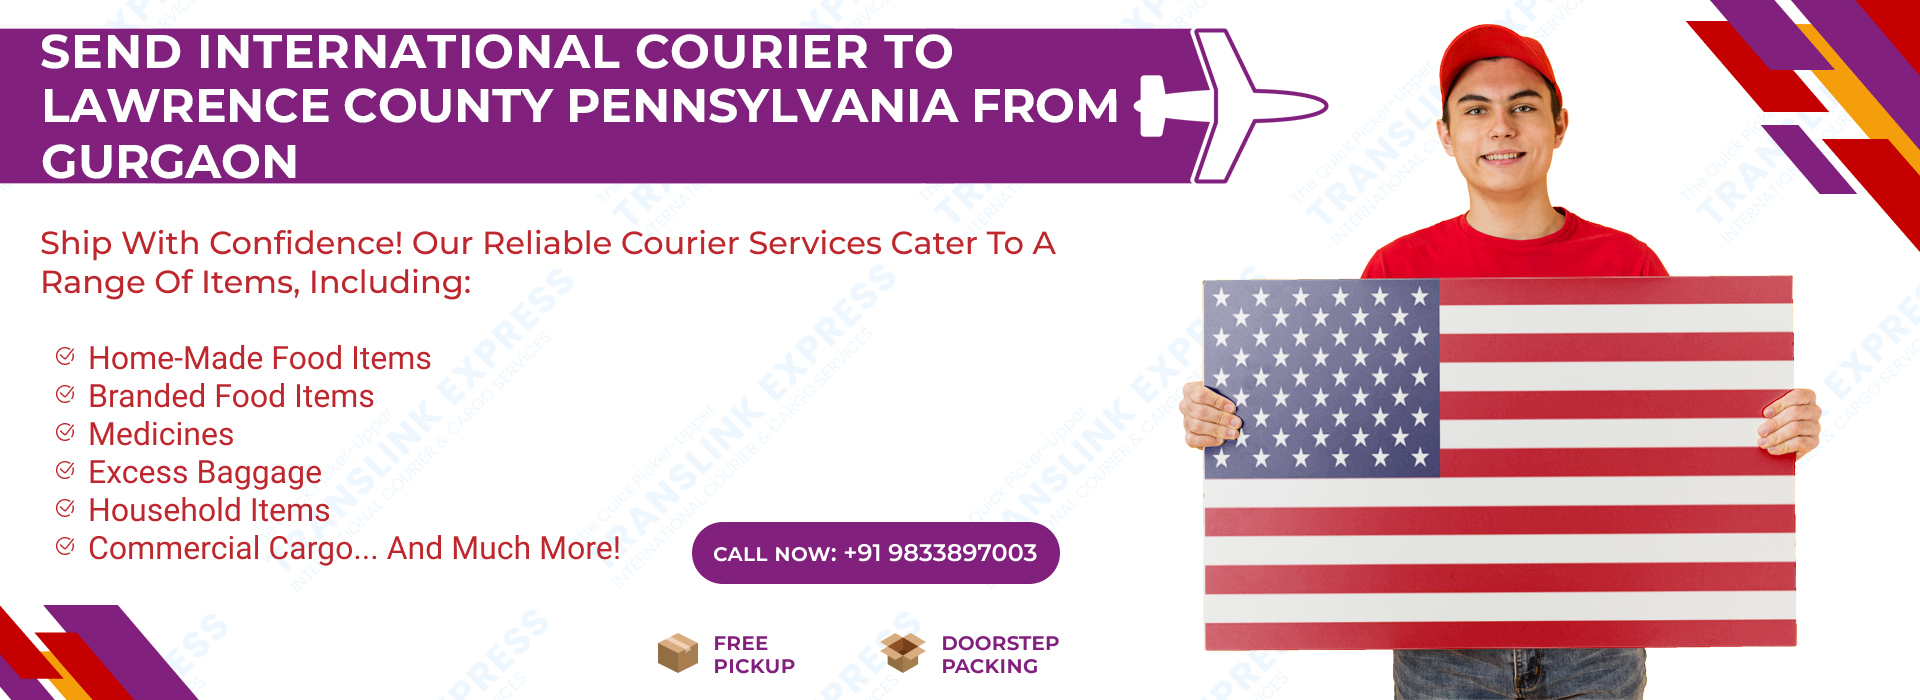 Courier to Lawrence County Pennsylvania From Gurgaon